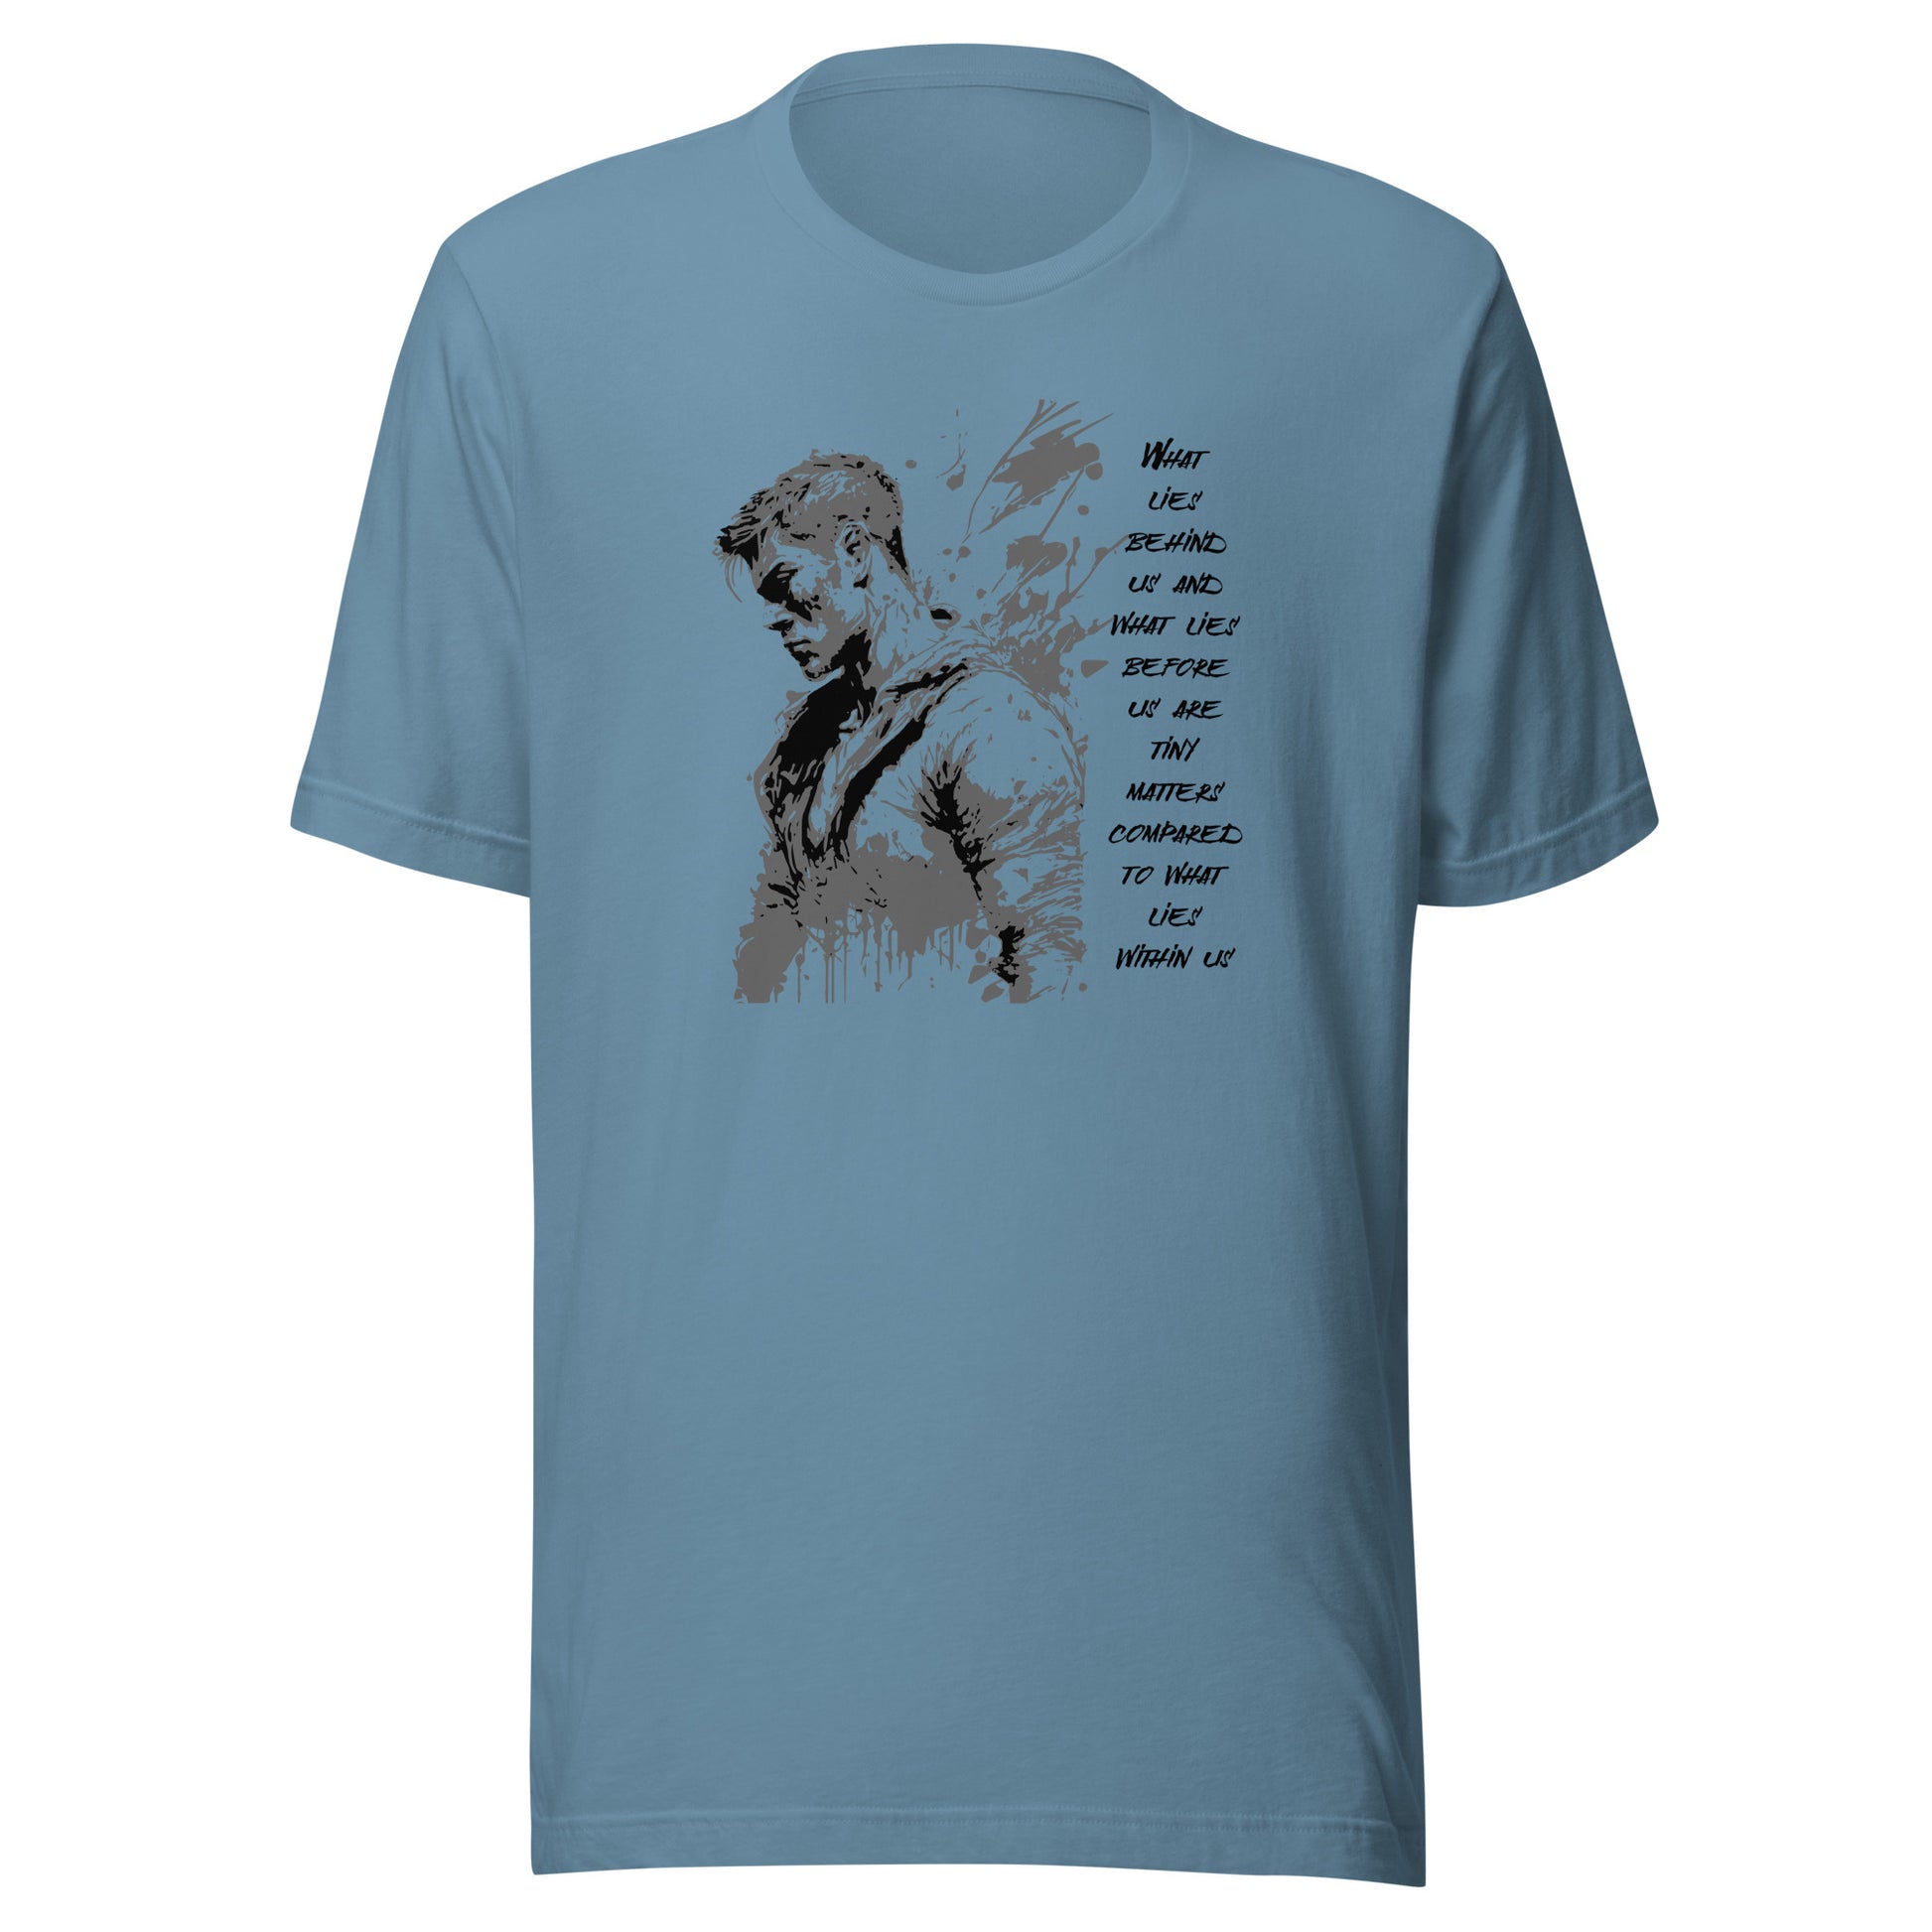 What Lies Within Us Men's Graphic T-Shirt Steel Blue